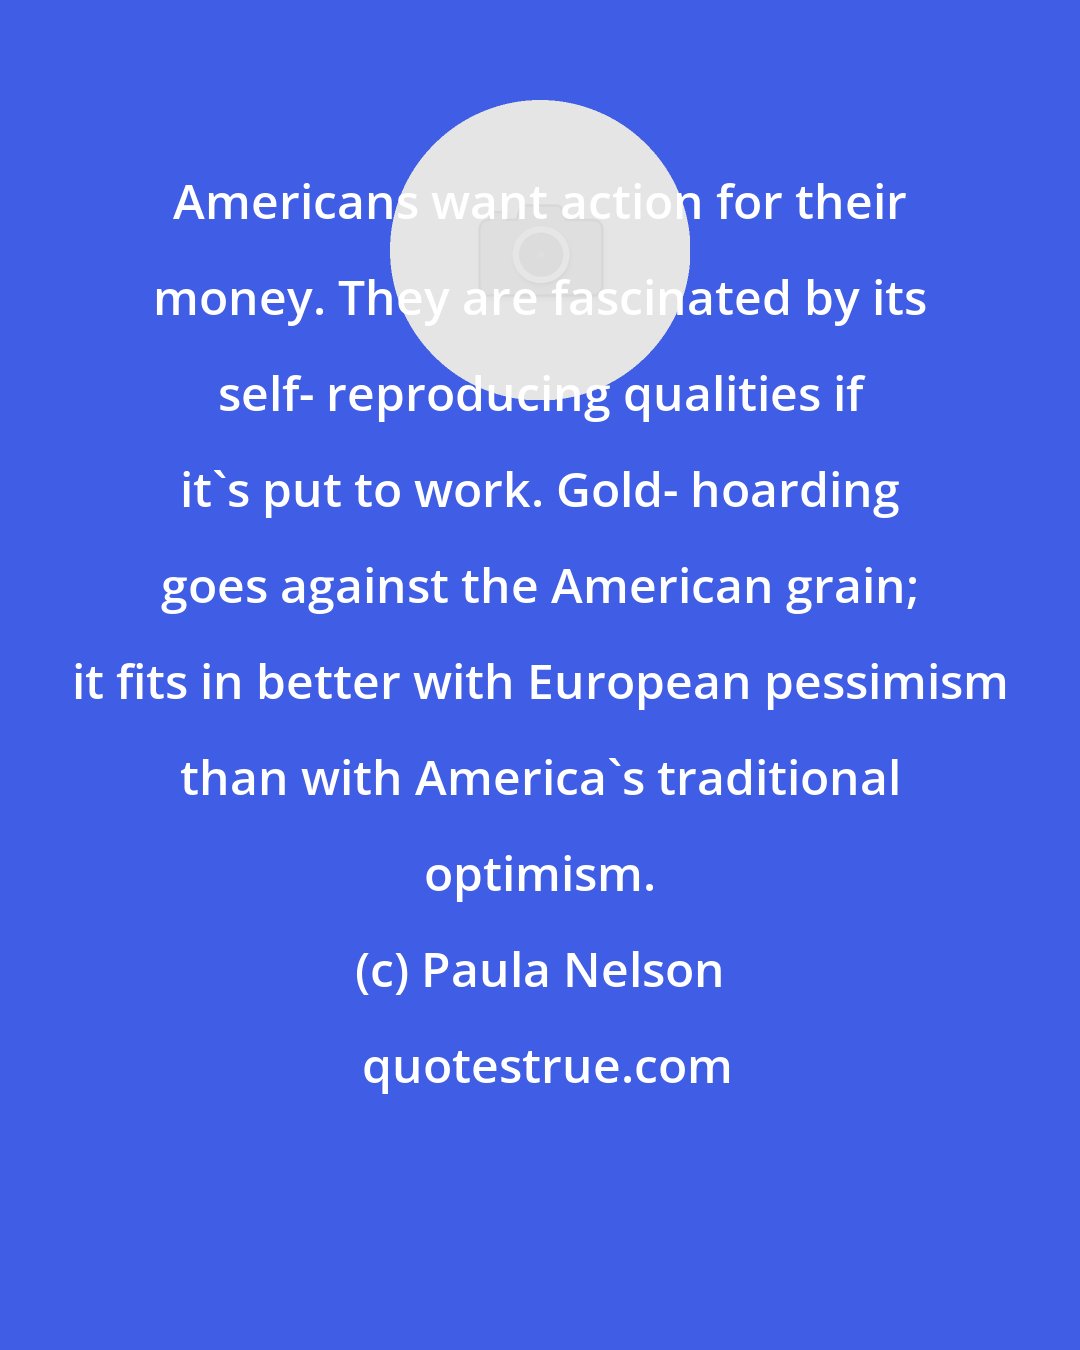 Paula Nelson: Americans want action for their money. They are fascinated by its self- reproducing qualities if it's put to work. Gold- hoarding goes against the American grain; it fits in better with European pessimism than with America's traditional optimism.